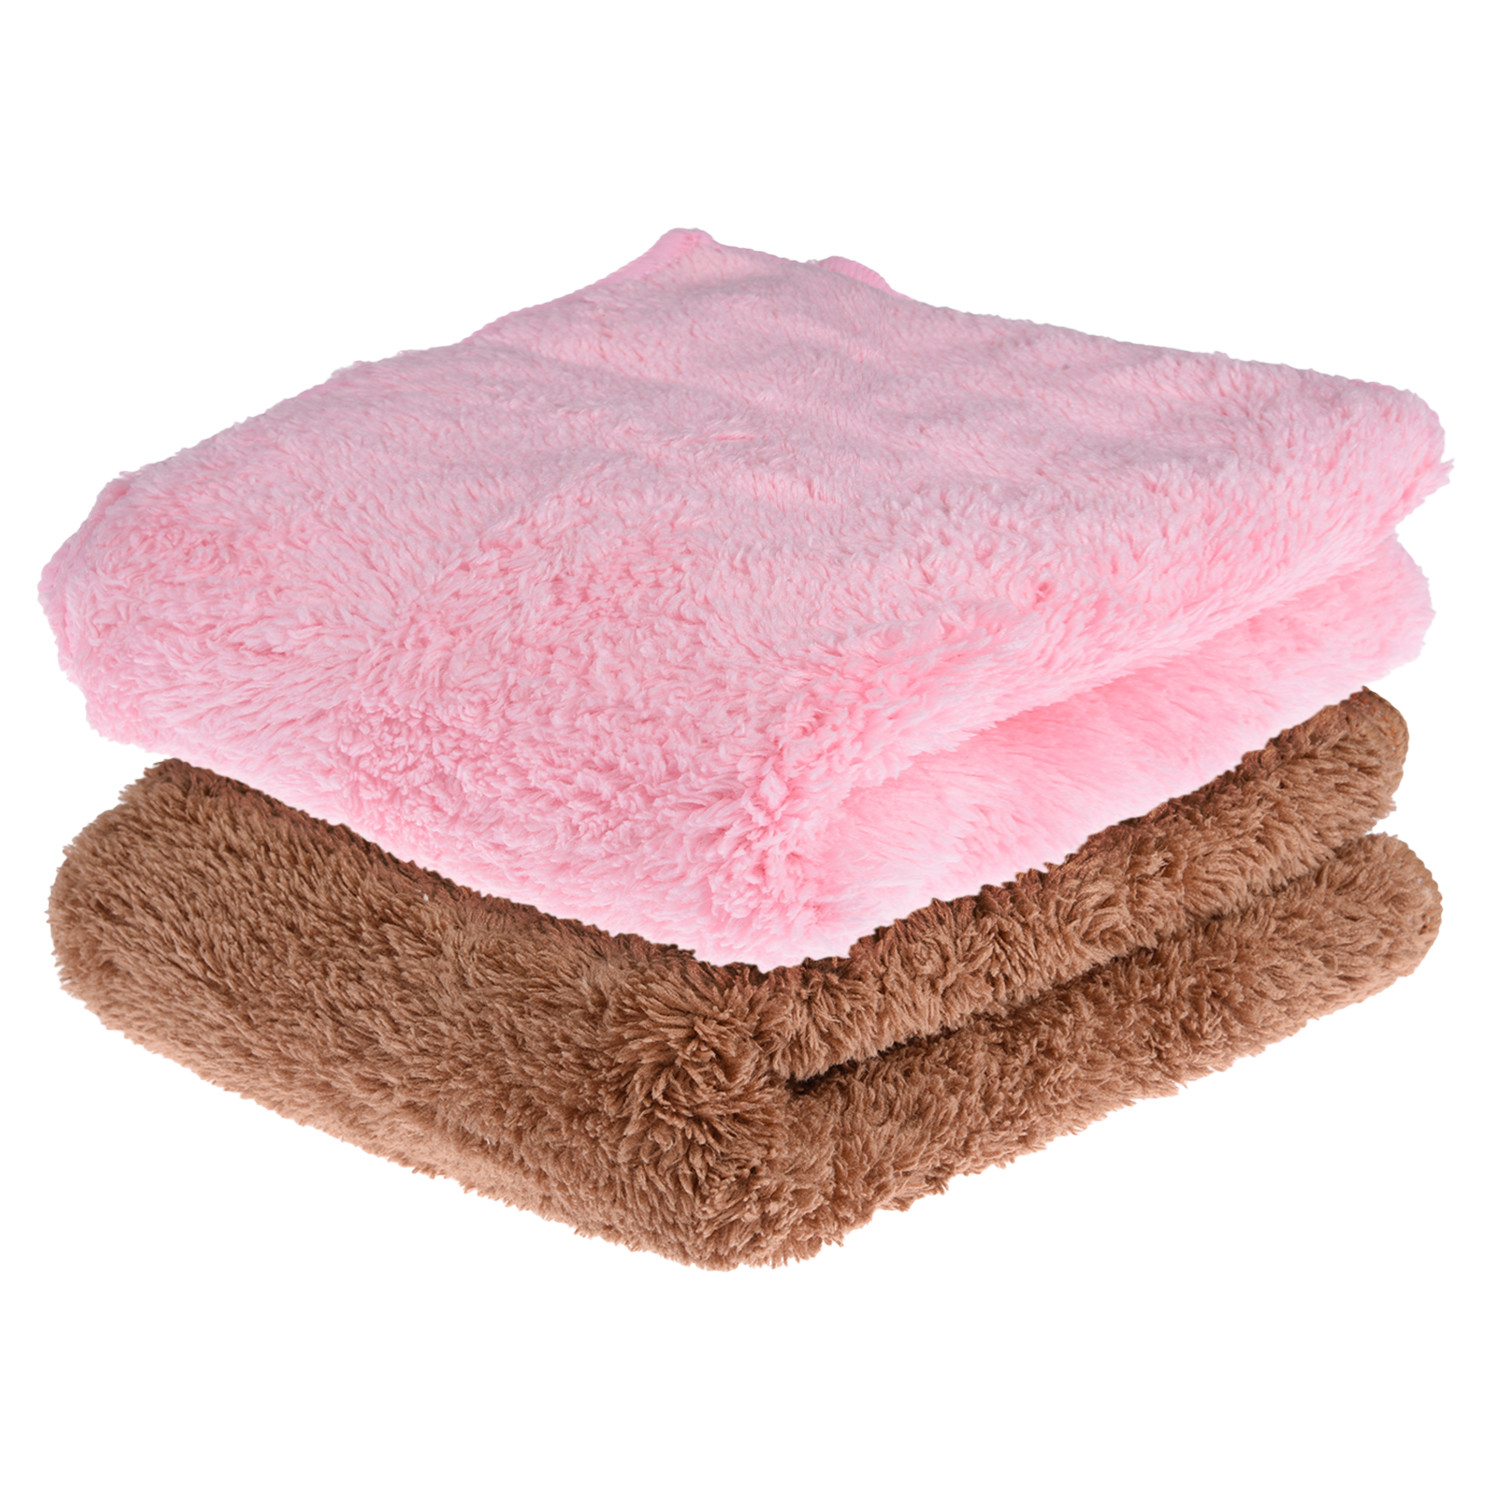 Kuber Industries Cleaning Towel | Reusable Cleaning Cloths for Kitchen | Duster Towel for Home Cleaning | 350 GSM Cleaning Cloth Towel for Car | Bike | 30x60 | Pack of 2 | Multi